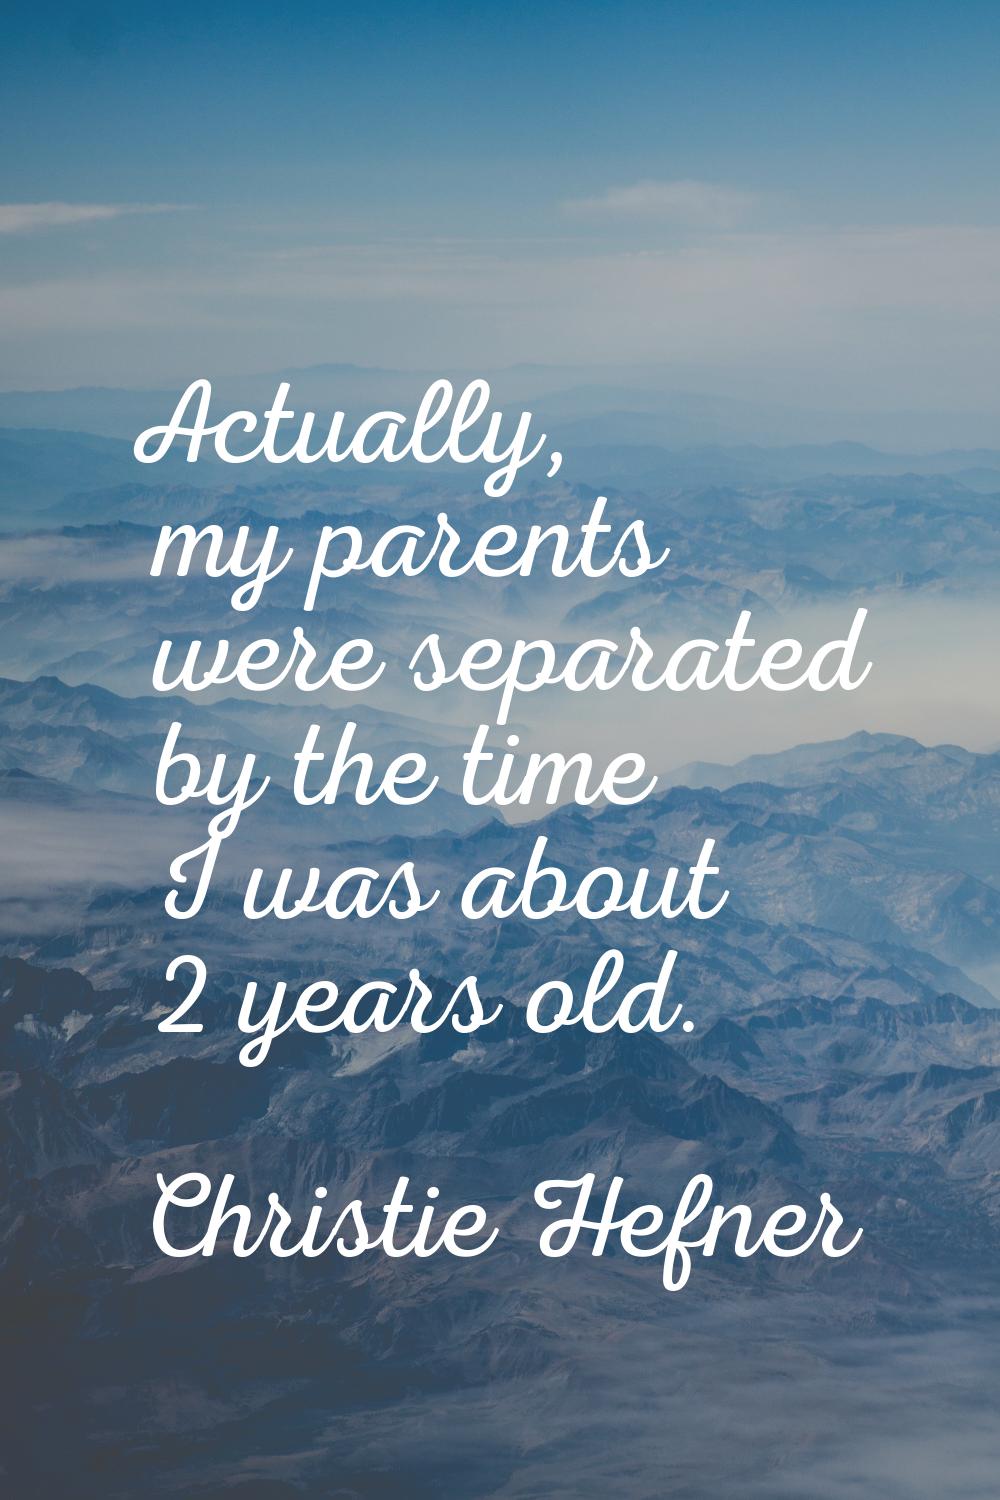 Actually, my parents were separated by the time I was about 2 years old.